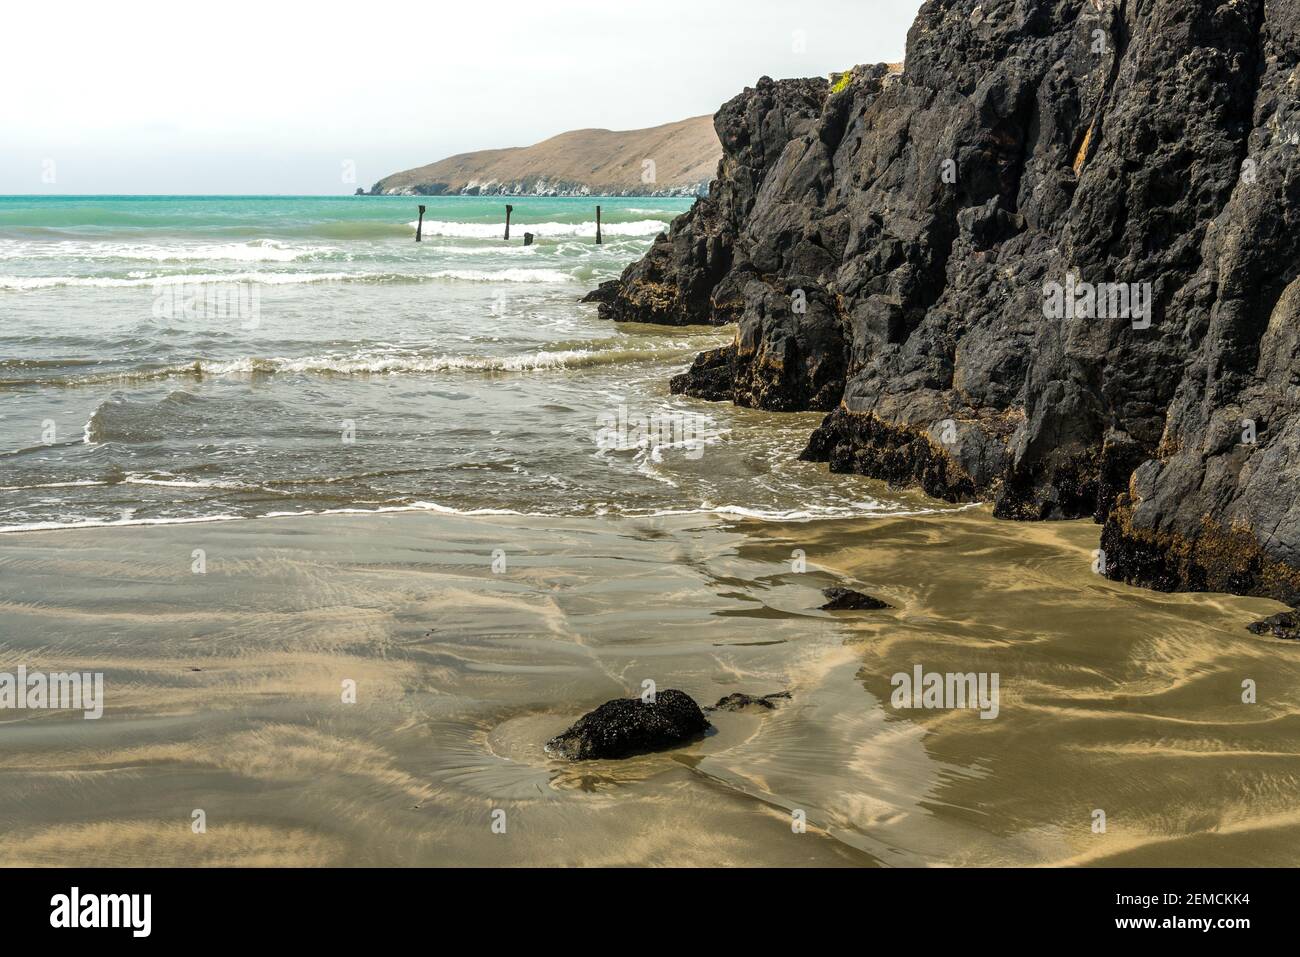 Seawater gently beating against the rocky coastline at Okains Bay, Banks Peninsula, South Island, New Zealand. Stock Photo